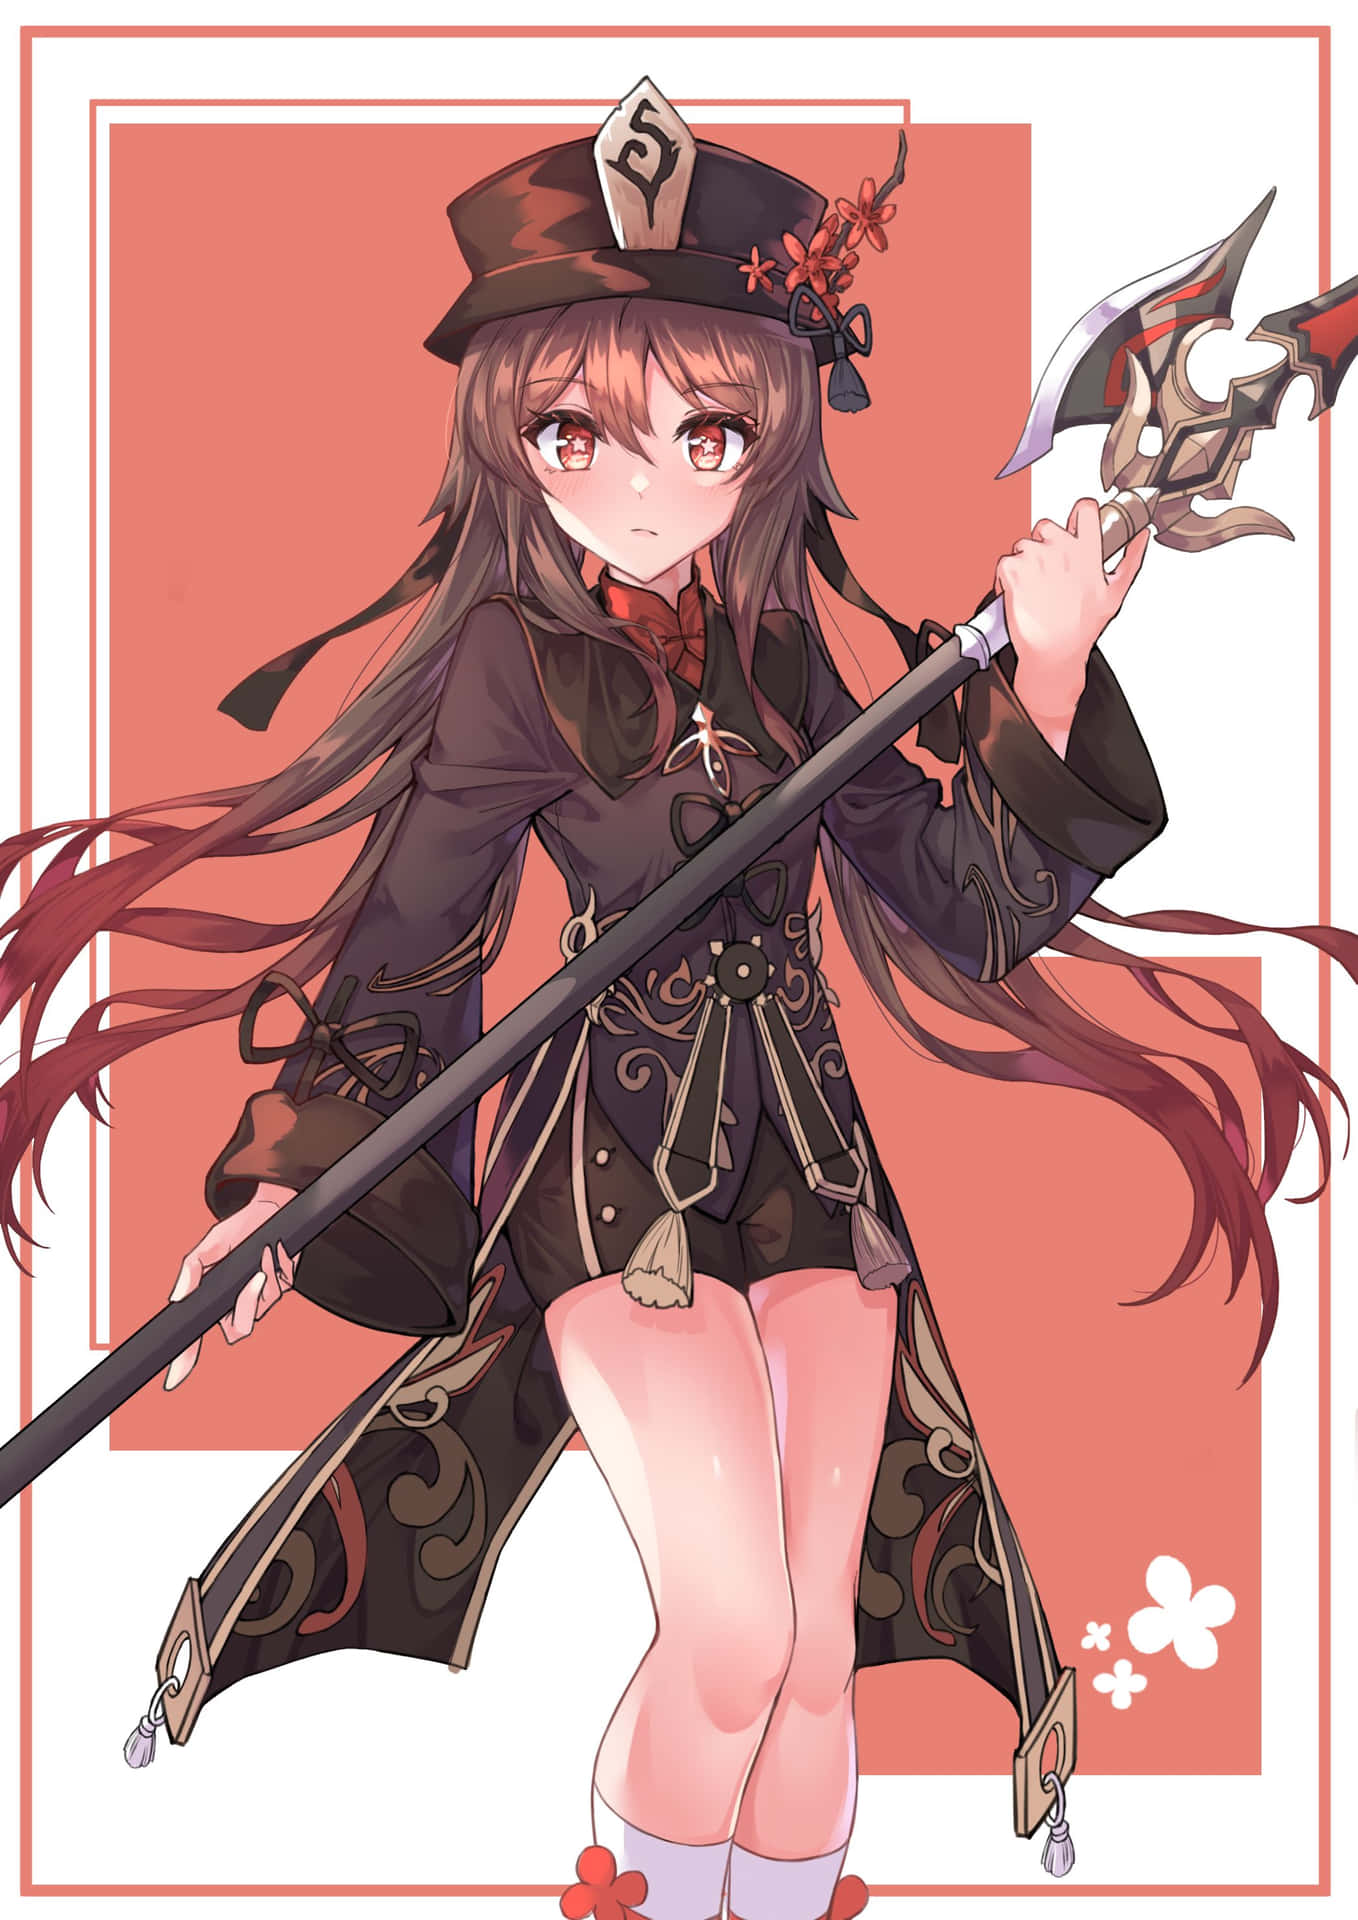 A Girl In A Black Outfit Holding A Sword